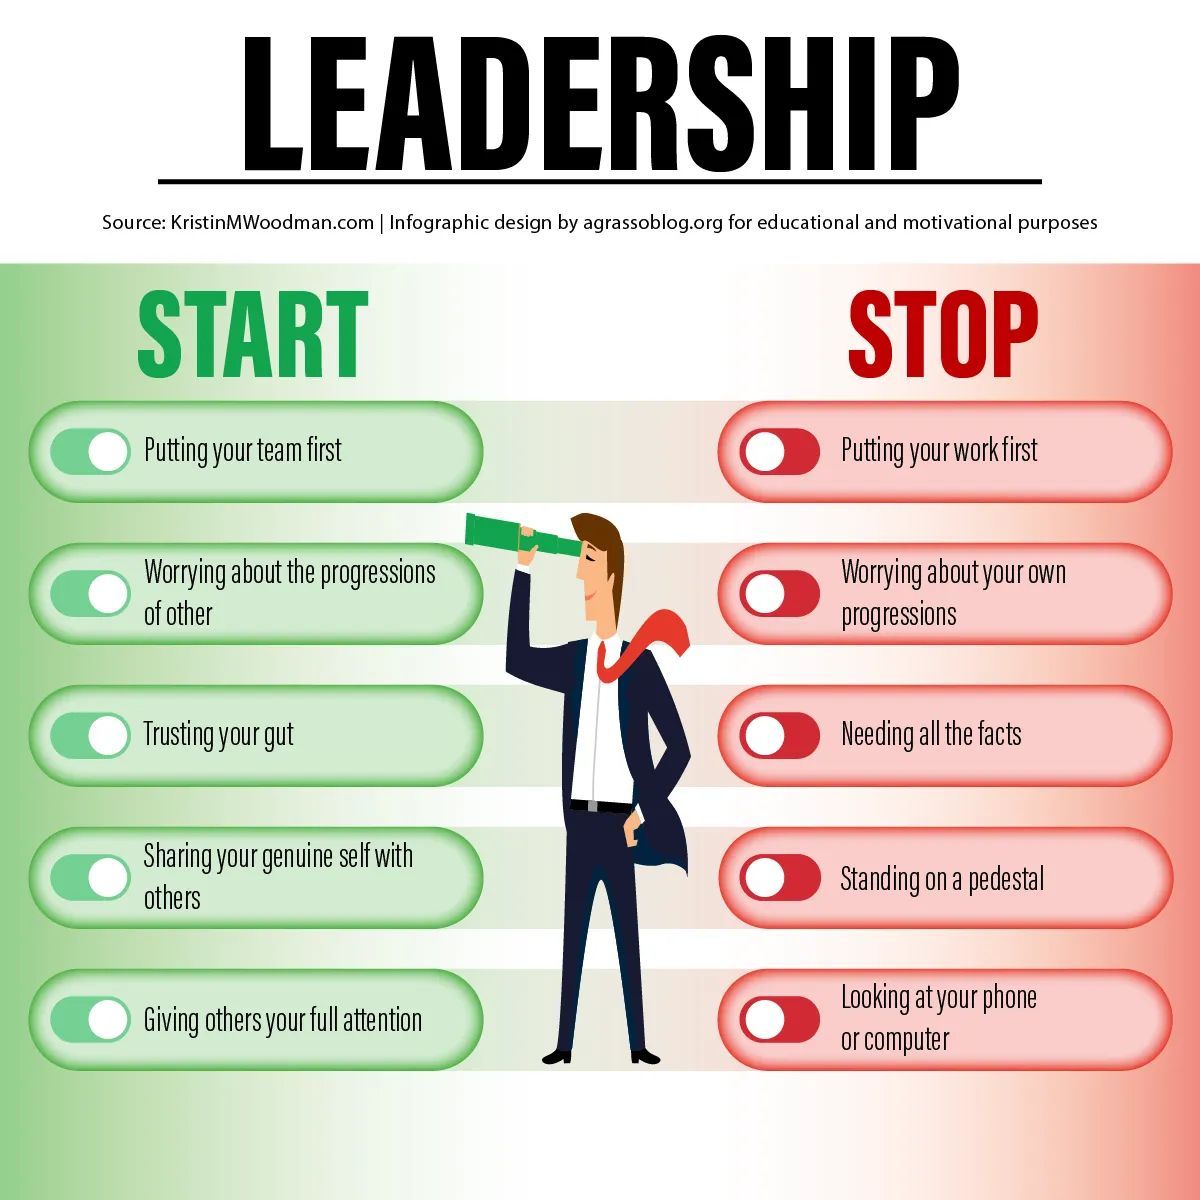 If you're aspiring to be a leader, take a few minutes of your time to analyze the infographic below 👇 There are some helpful tips on what you need to start doing and what you should stop immediately. #Leadership #Strategy #Motivation